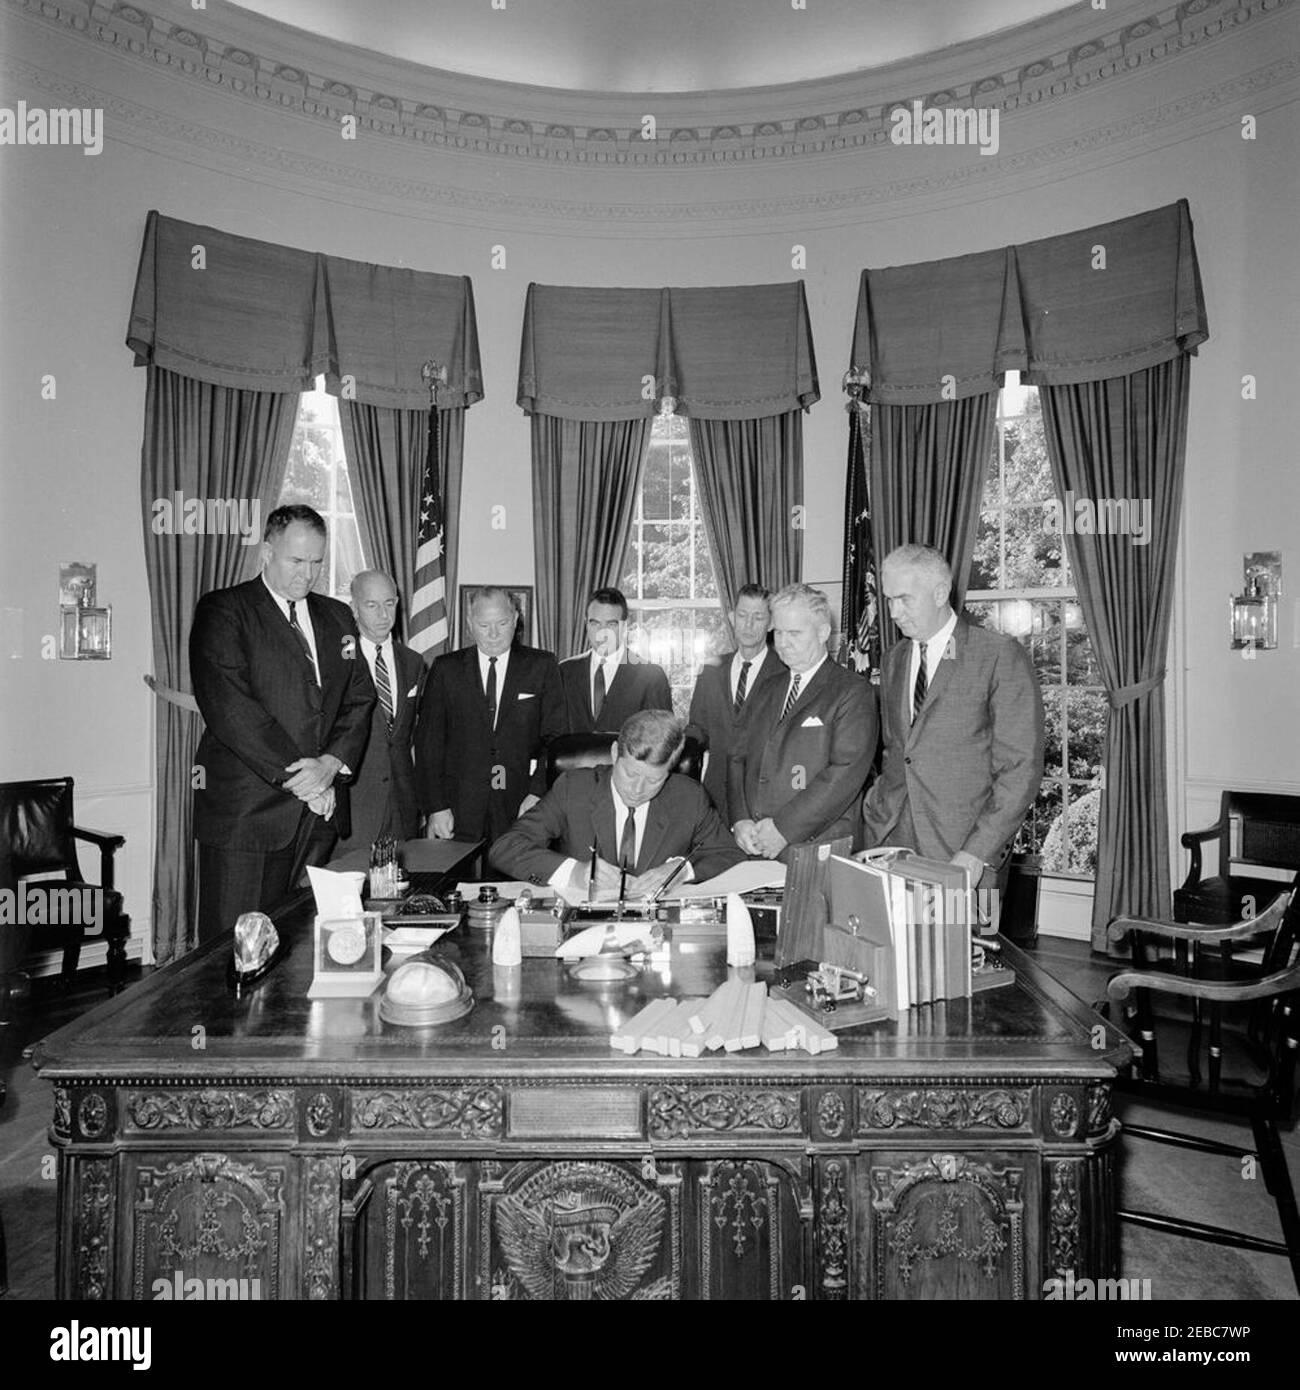 Bill signing - House Joint Resolution 783 Public Law 87-678, Delaware-New Jersey Compact, 9:50AM. President John F. Kennedy (seated at desk) signs the Delaware-New Jersey Compact, a House Joint Resolution establishing the Delaware River and Bay Authority. Standing (L-R): Governor of Delaware, Elbert N. Carvel; unidentified; Commissioner of the New Jersey Department of Conservation and Economic Development, H. Mat Adams; Senator Harrison A. Williams (New Jersey); unidentified; Representative Harris B. McDowell, Jr. (Delaware); Representative Frank Thompson, Jr. (New Jersey). Oval Office, White Stock Photo